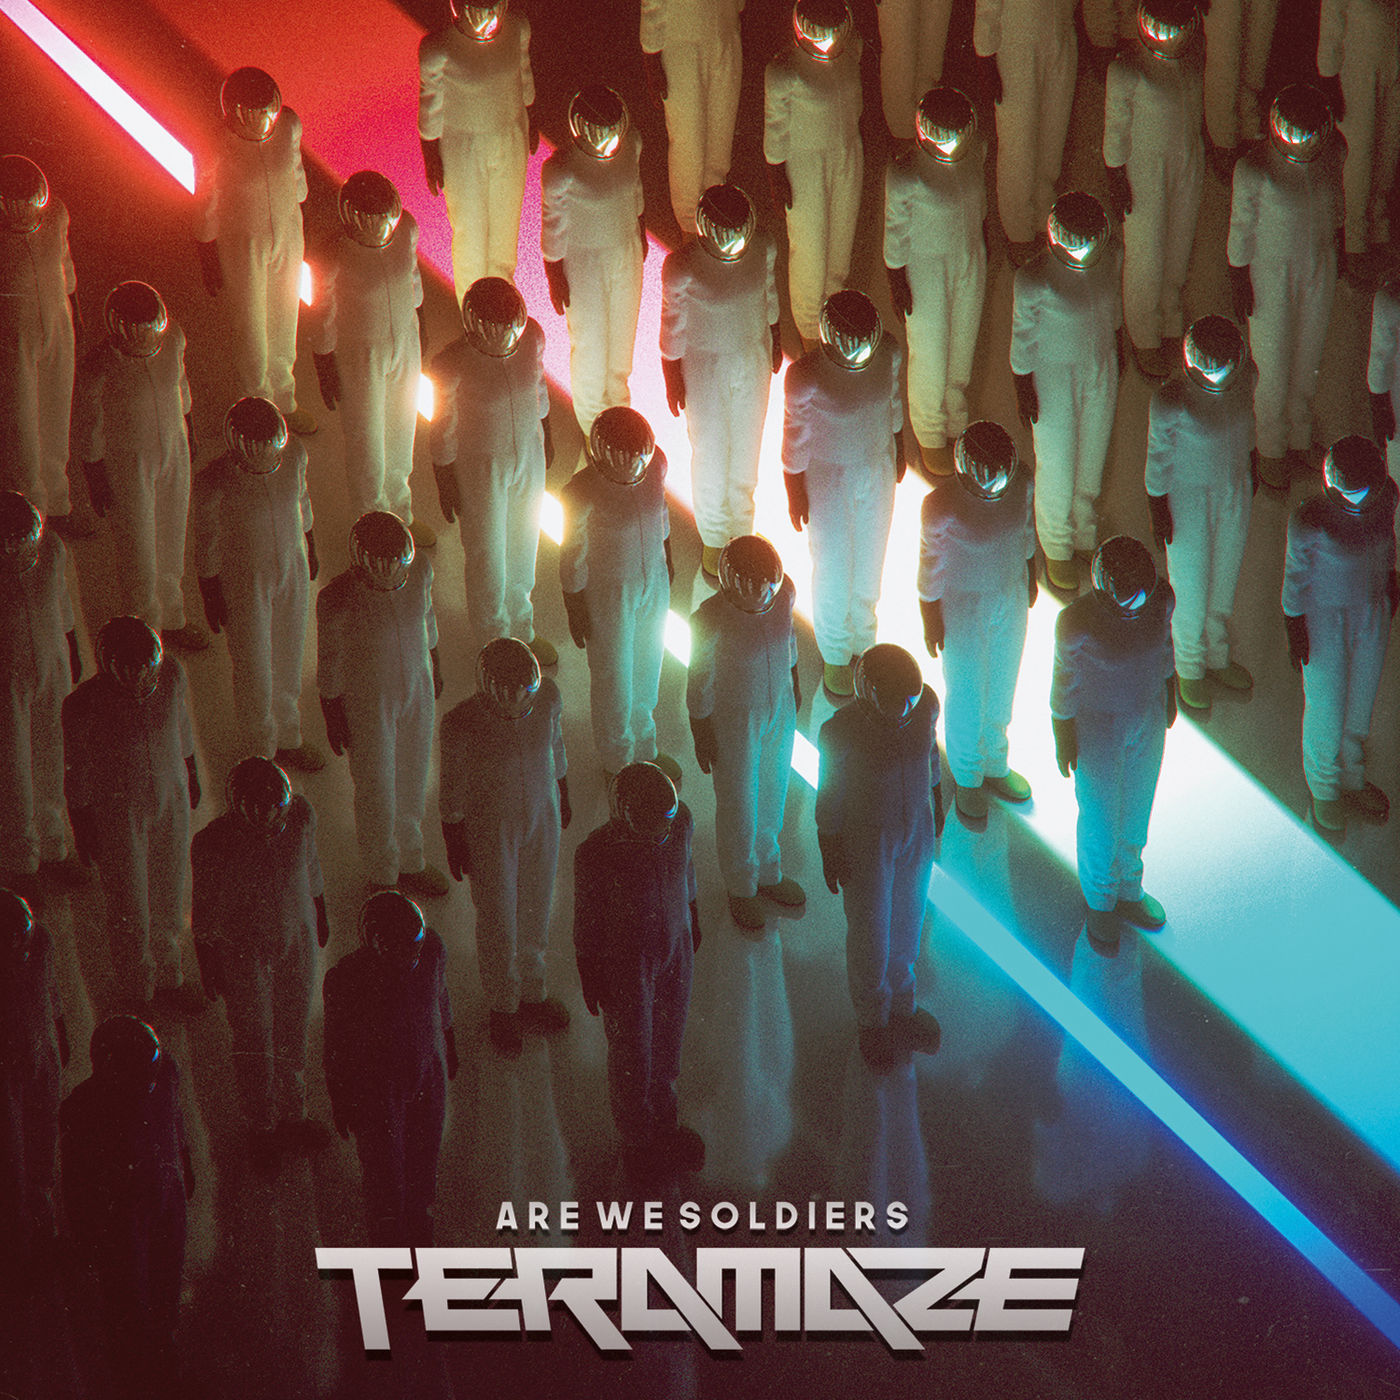 Teramaze - Are We Soldiers (2019)